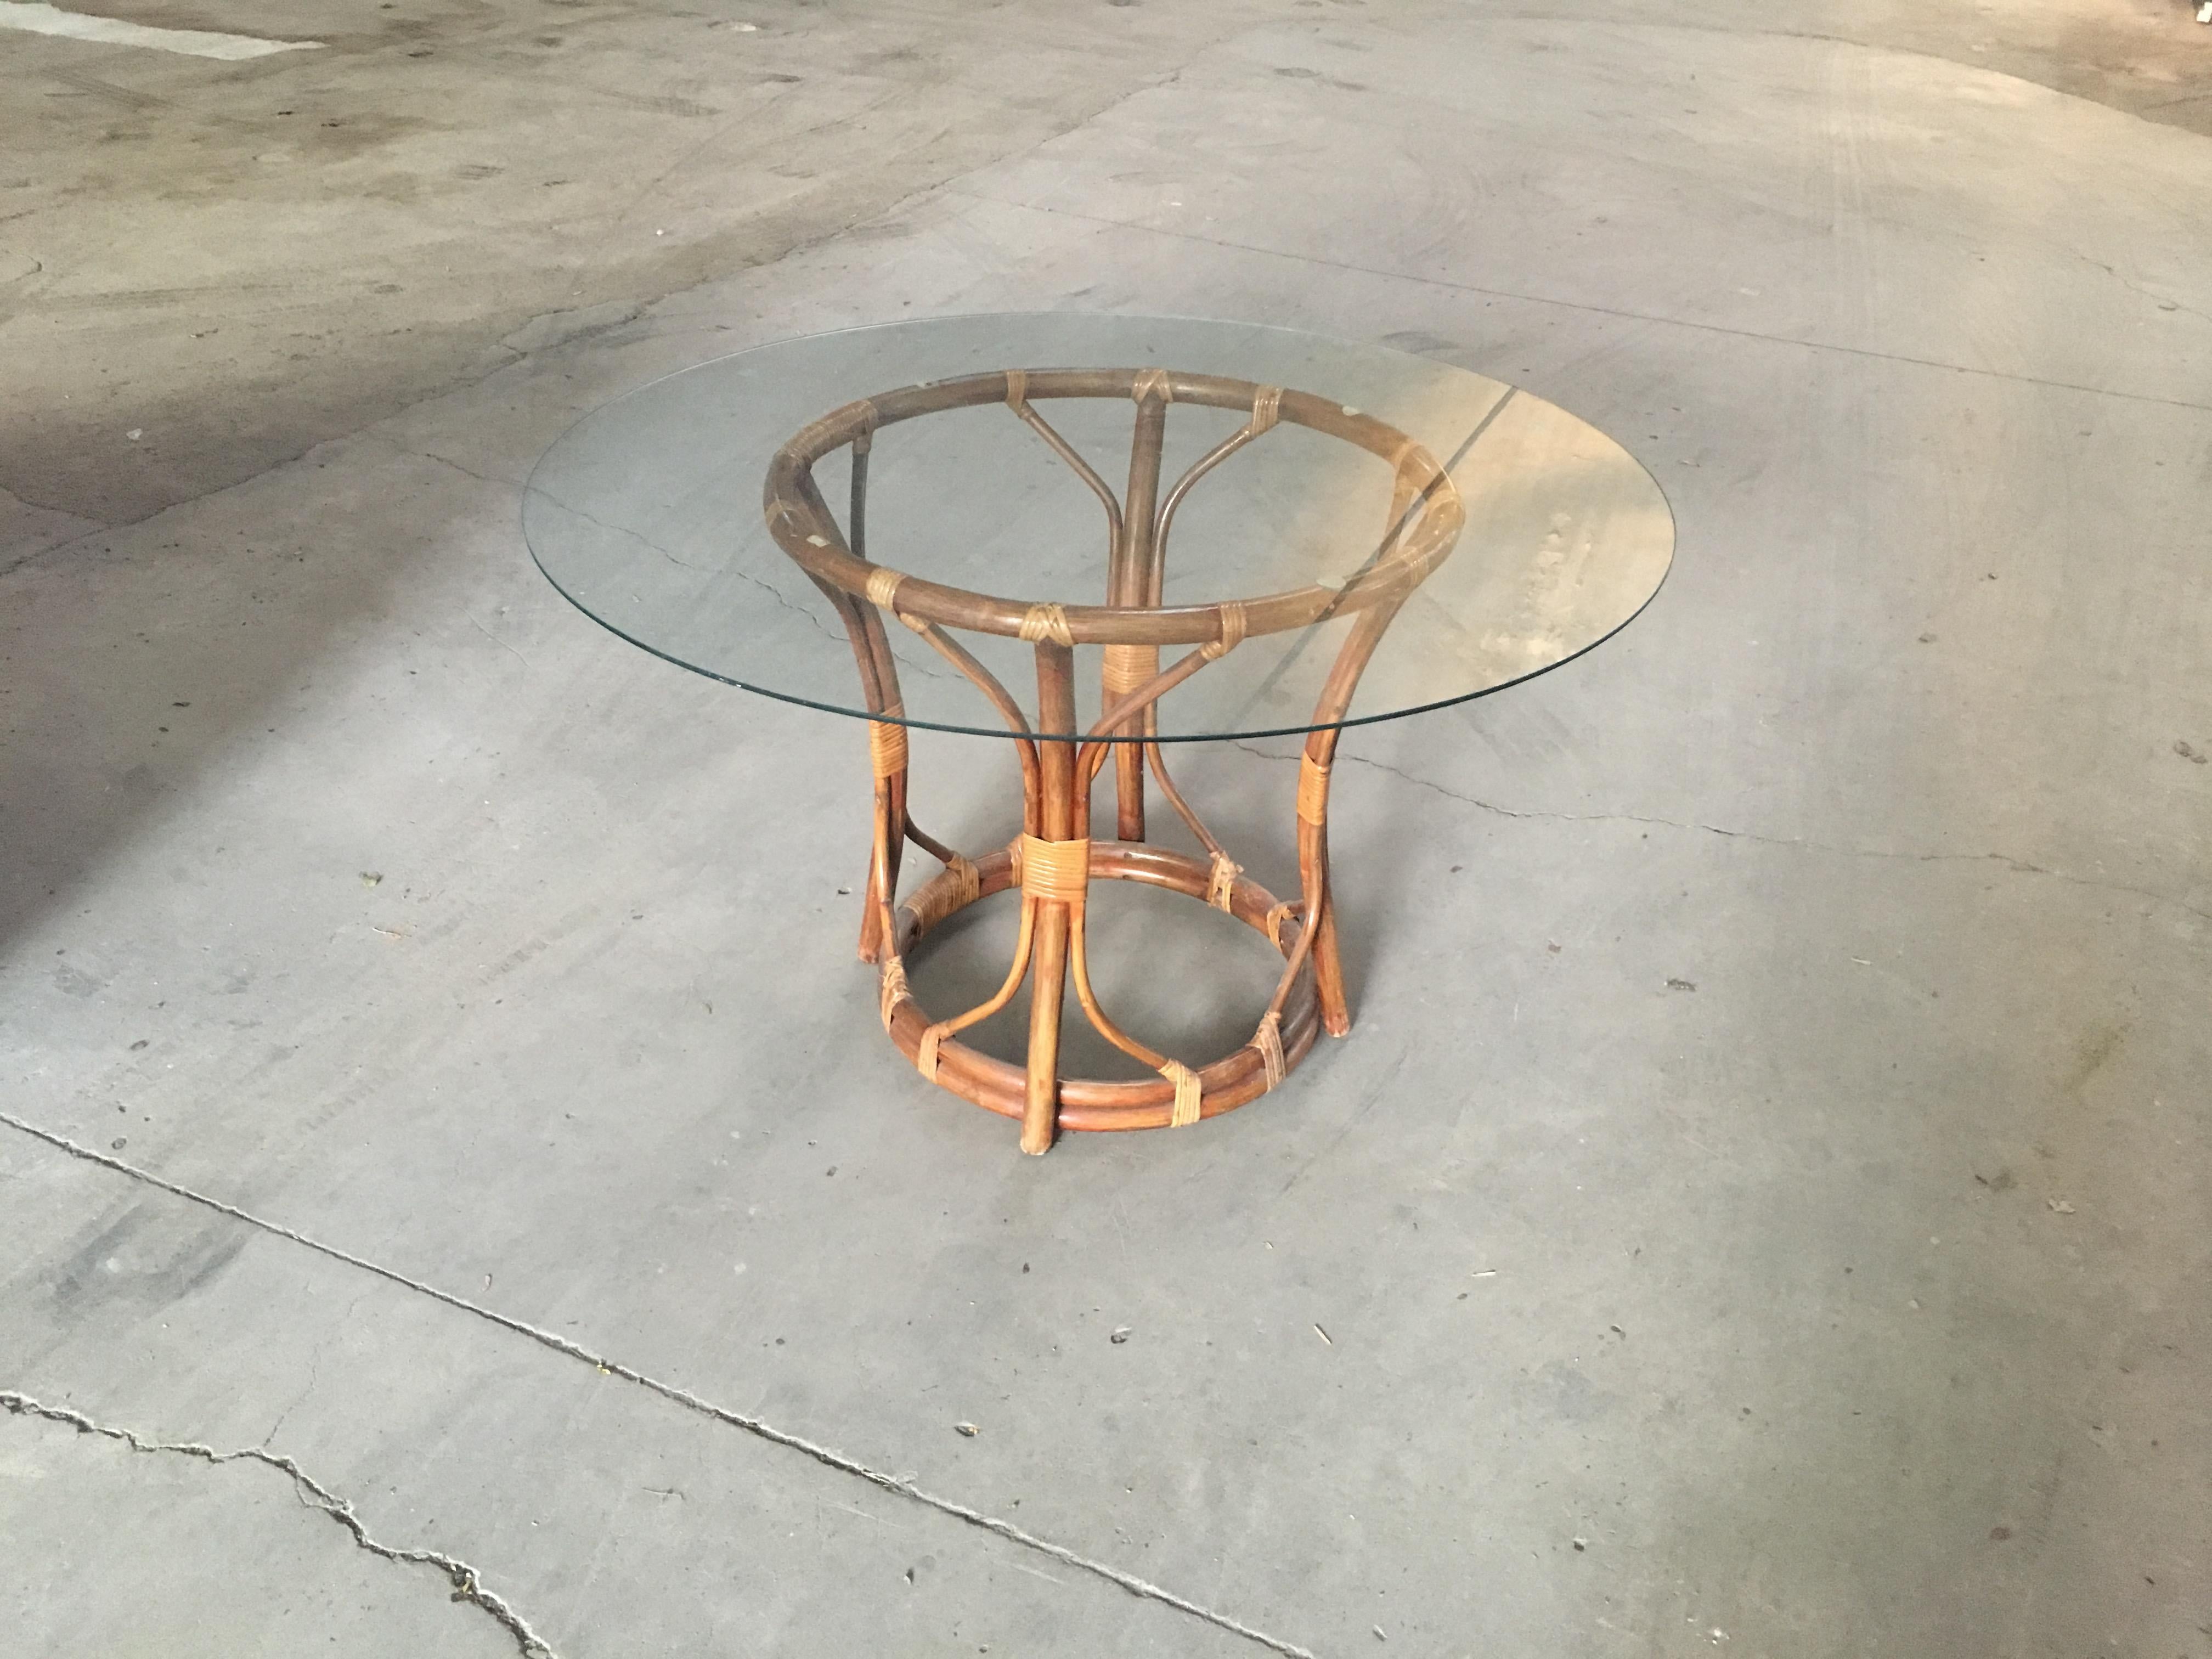 Mid-Century Modern Italian bamboo and cane round table with glass top, 1970s.